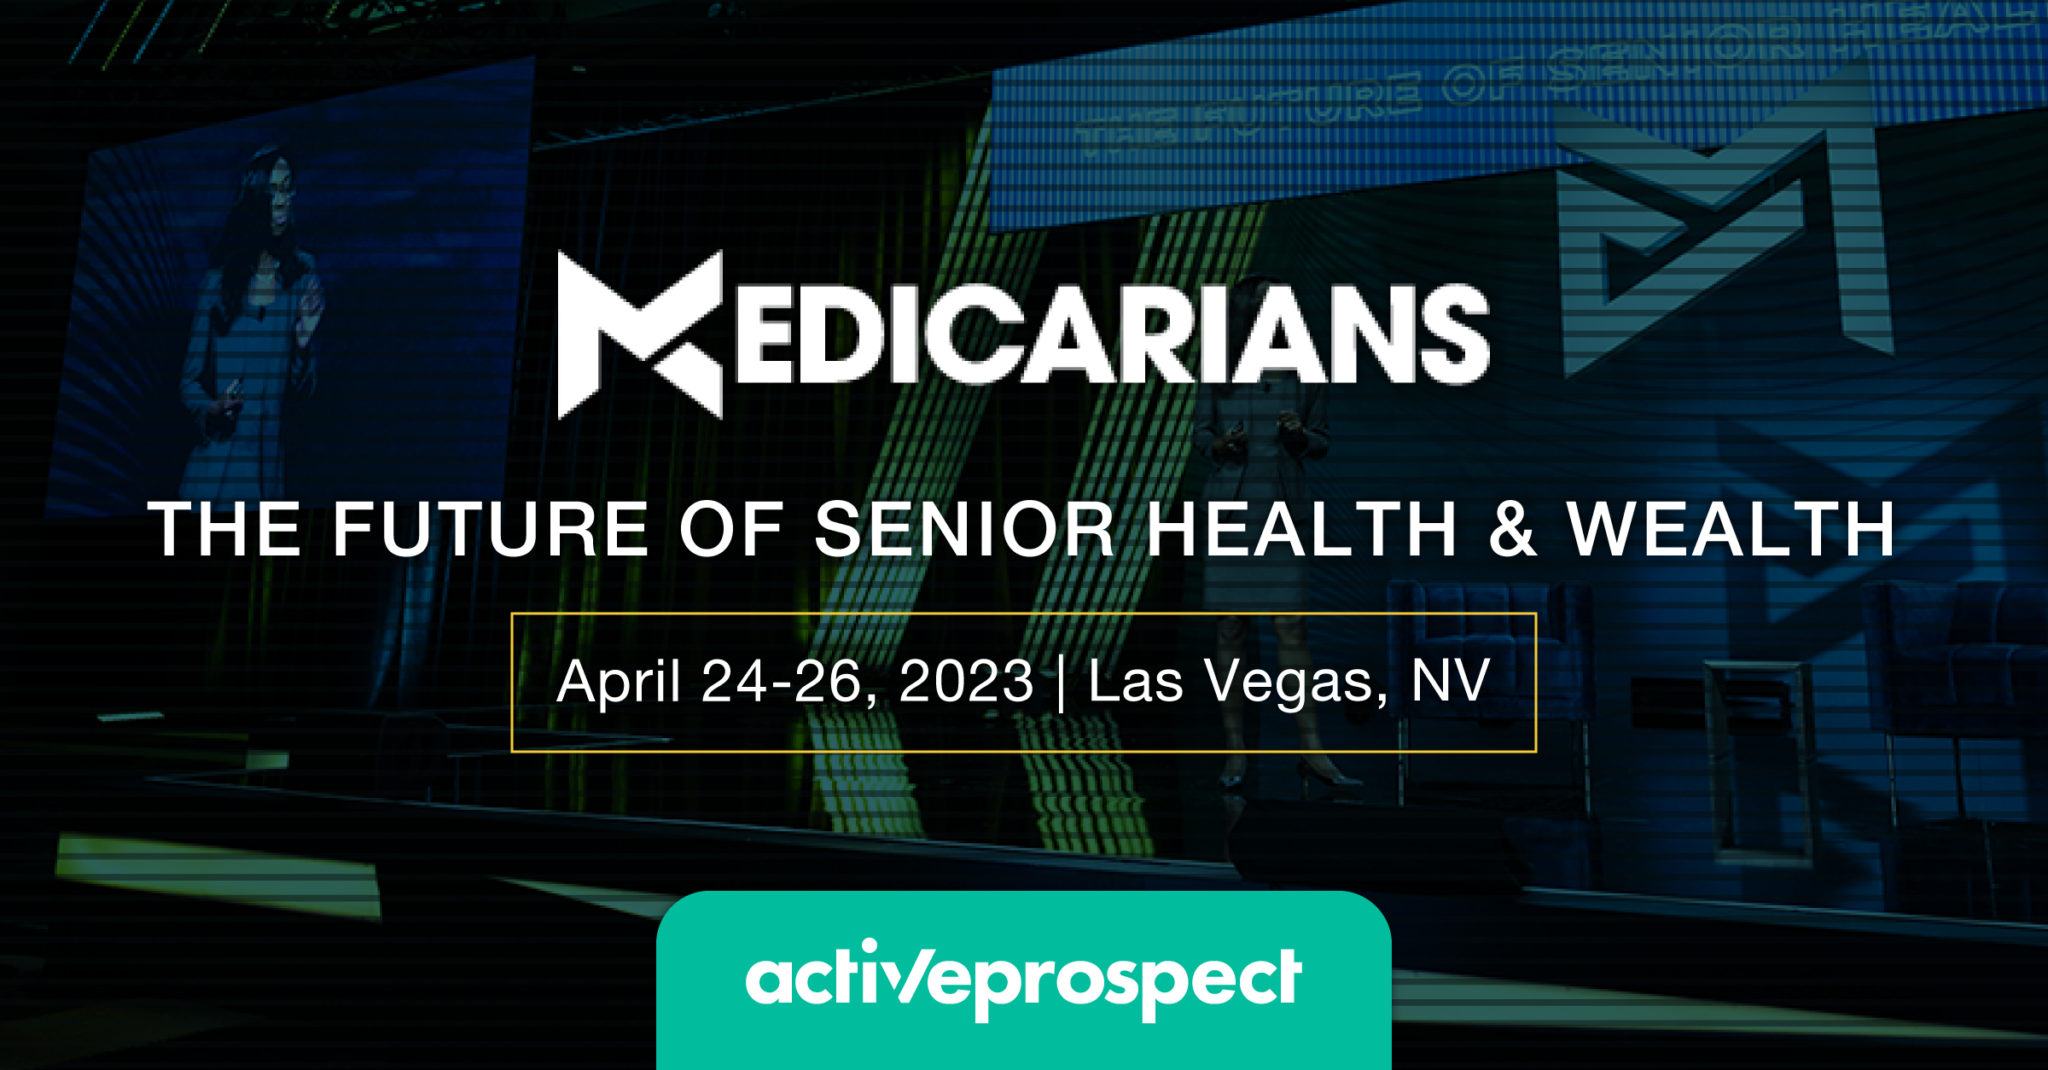 Medicarians Conference 2023 ActiveProspect